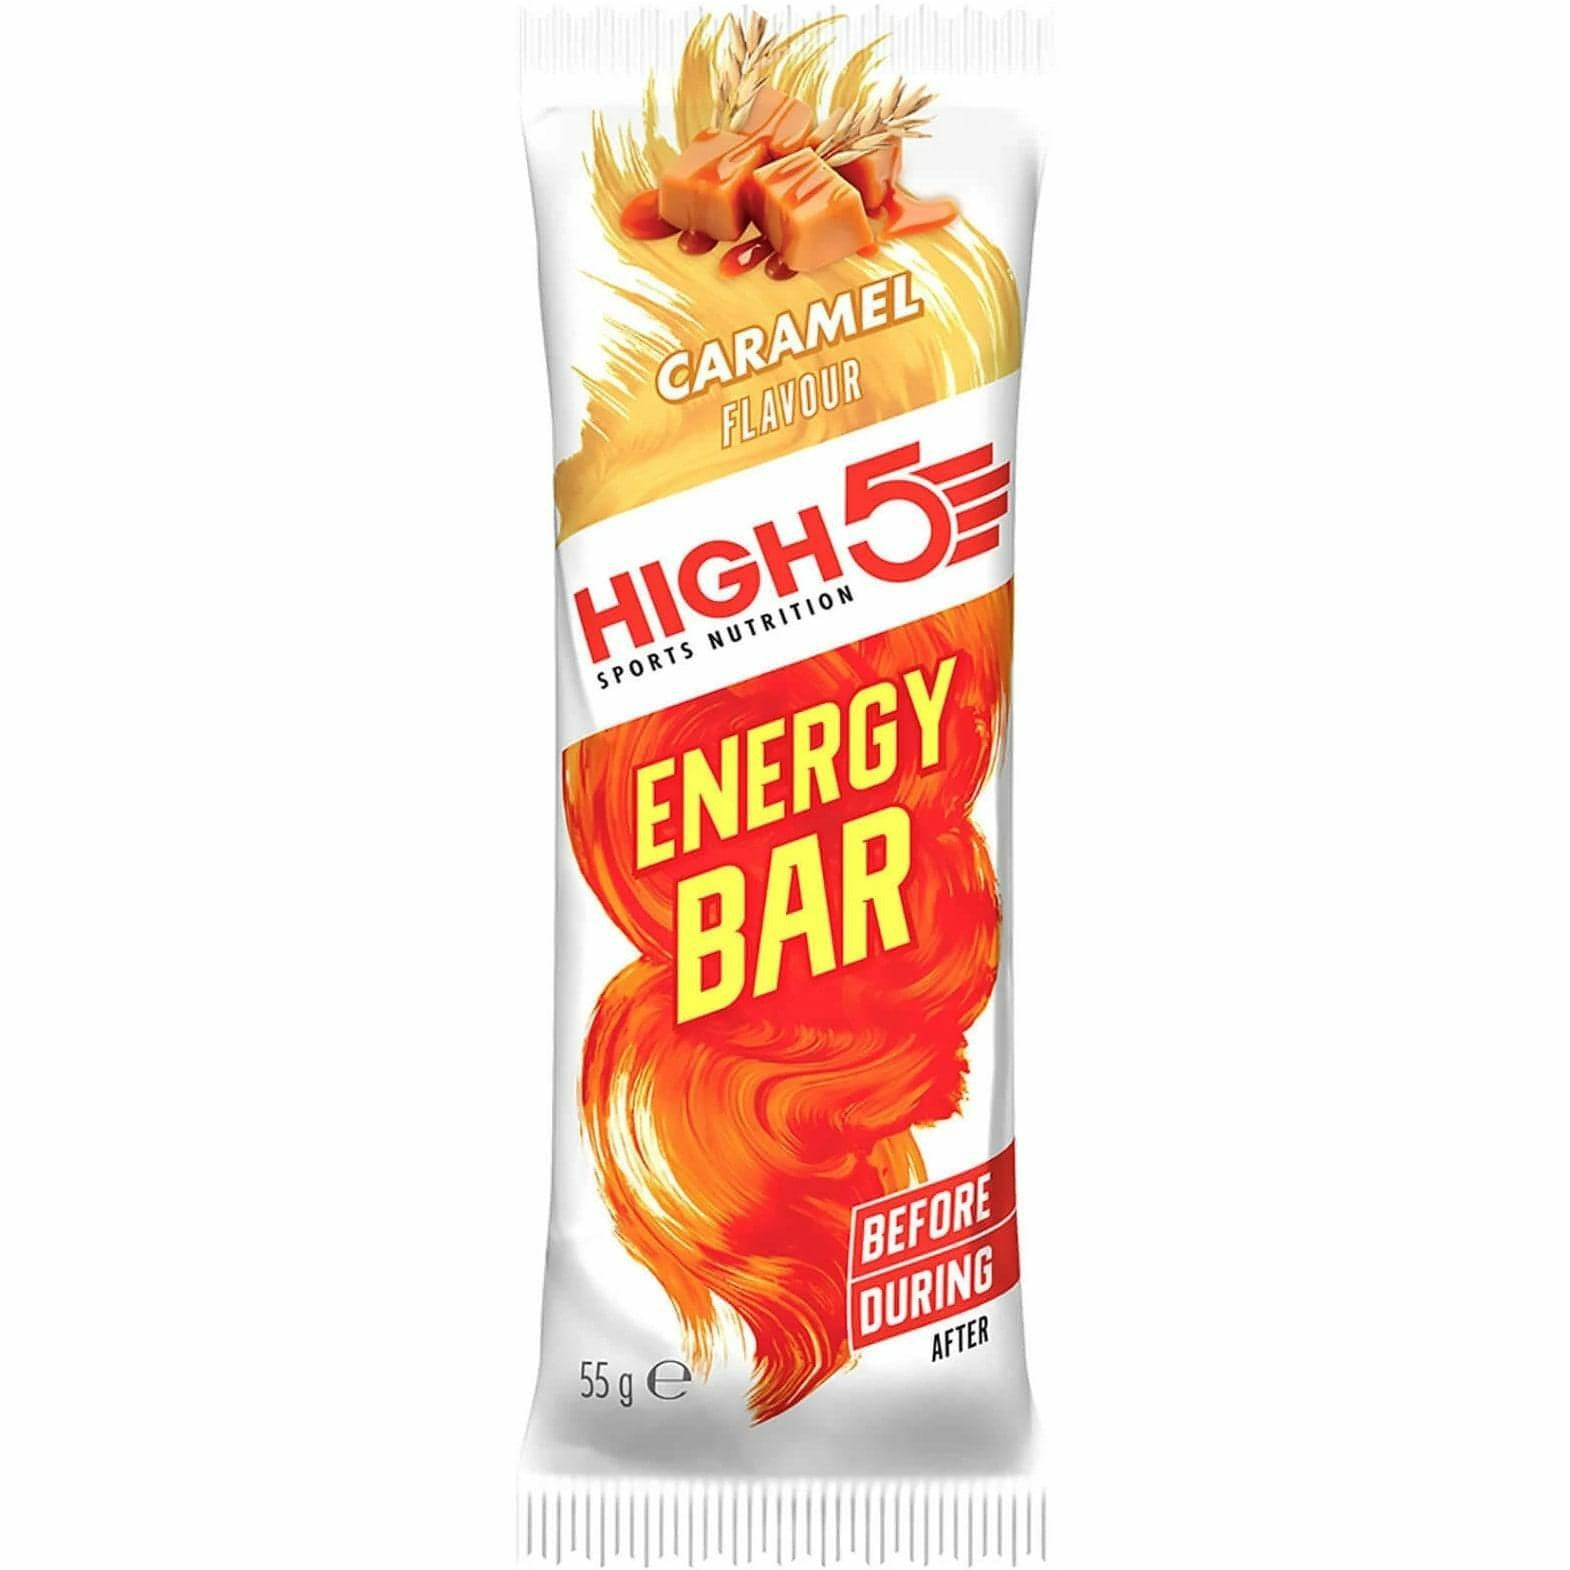 High 5 Sports Nutrition Energy Bar Caramel Flavour 55g RRP £1.25 CLEARANCE XL 89p or 2 for £1.50